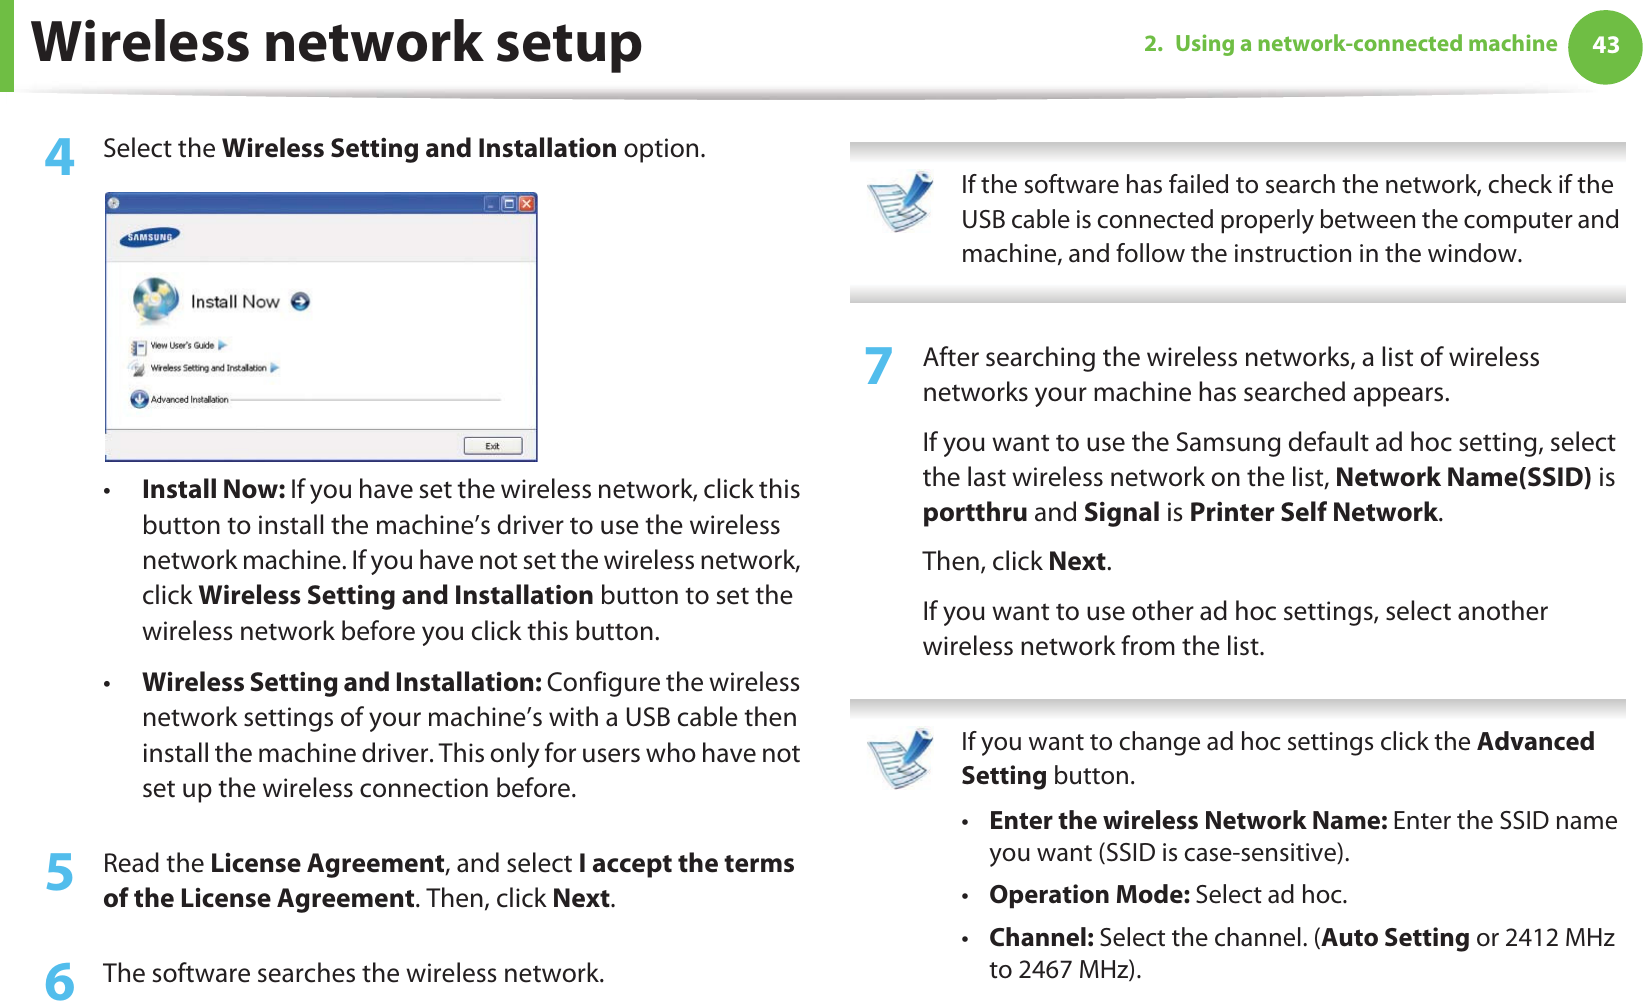 Wireless network setup 432. Using a network-connected machine4  Select the Wireless Setting and Installation option.•Install Now: If you have set the wireless network, click this button to install the machine’s driver to use the wireless network machine. If you have not set the wireless network, click Wireless Setting and Installation button to set the wireless network before you click this button. •Wireless Setting and Installation: Configure the wireless network settings of your machine’s with a USB cable then install the machine driver. This only for users who have not set up the wireless connection before.5  Read the License Agreement, and select I accept the terms of the License Agreement. Then, click Next.6  The software searches the wireless network. If the software has failed to search the network, check if the USB cable is connected properly between the computer and machine, and follow the instruction in the window. 7  After searching the wireless networks, a list of wireless networks your machine has searched appears. If you want to use the Samsung default ad hoc setting, select the last wireless network on the list, Network Name(SSID) is portthru and Signal is Printer Self Network.Then, click Next.If you want to use other ad hoc settings, select another wireless network from the list.  If you want to change ad hoc settings click the Advanced Setting button. •Enter the wireless Network Name: Enter the SSID name you want (SSID is case-sensitive).•Operation Mode: Select ad hoc.•Channel: Select the channel. (Auto Setting or 2412 MHz to 2467 MHz).